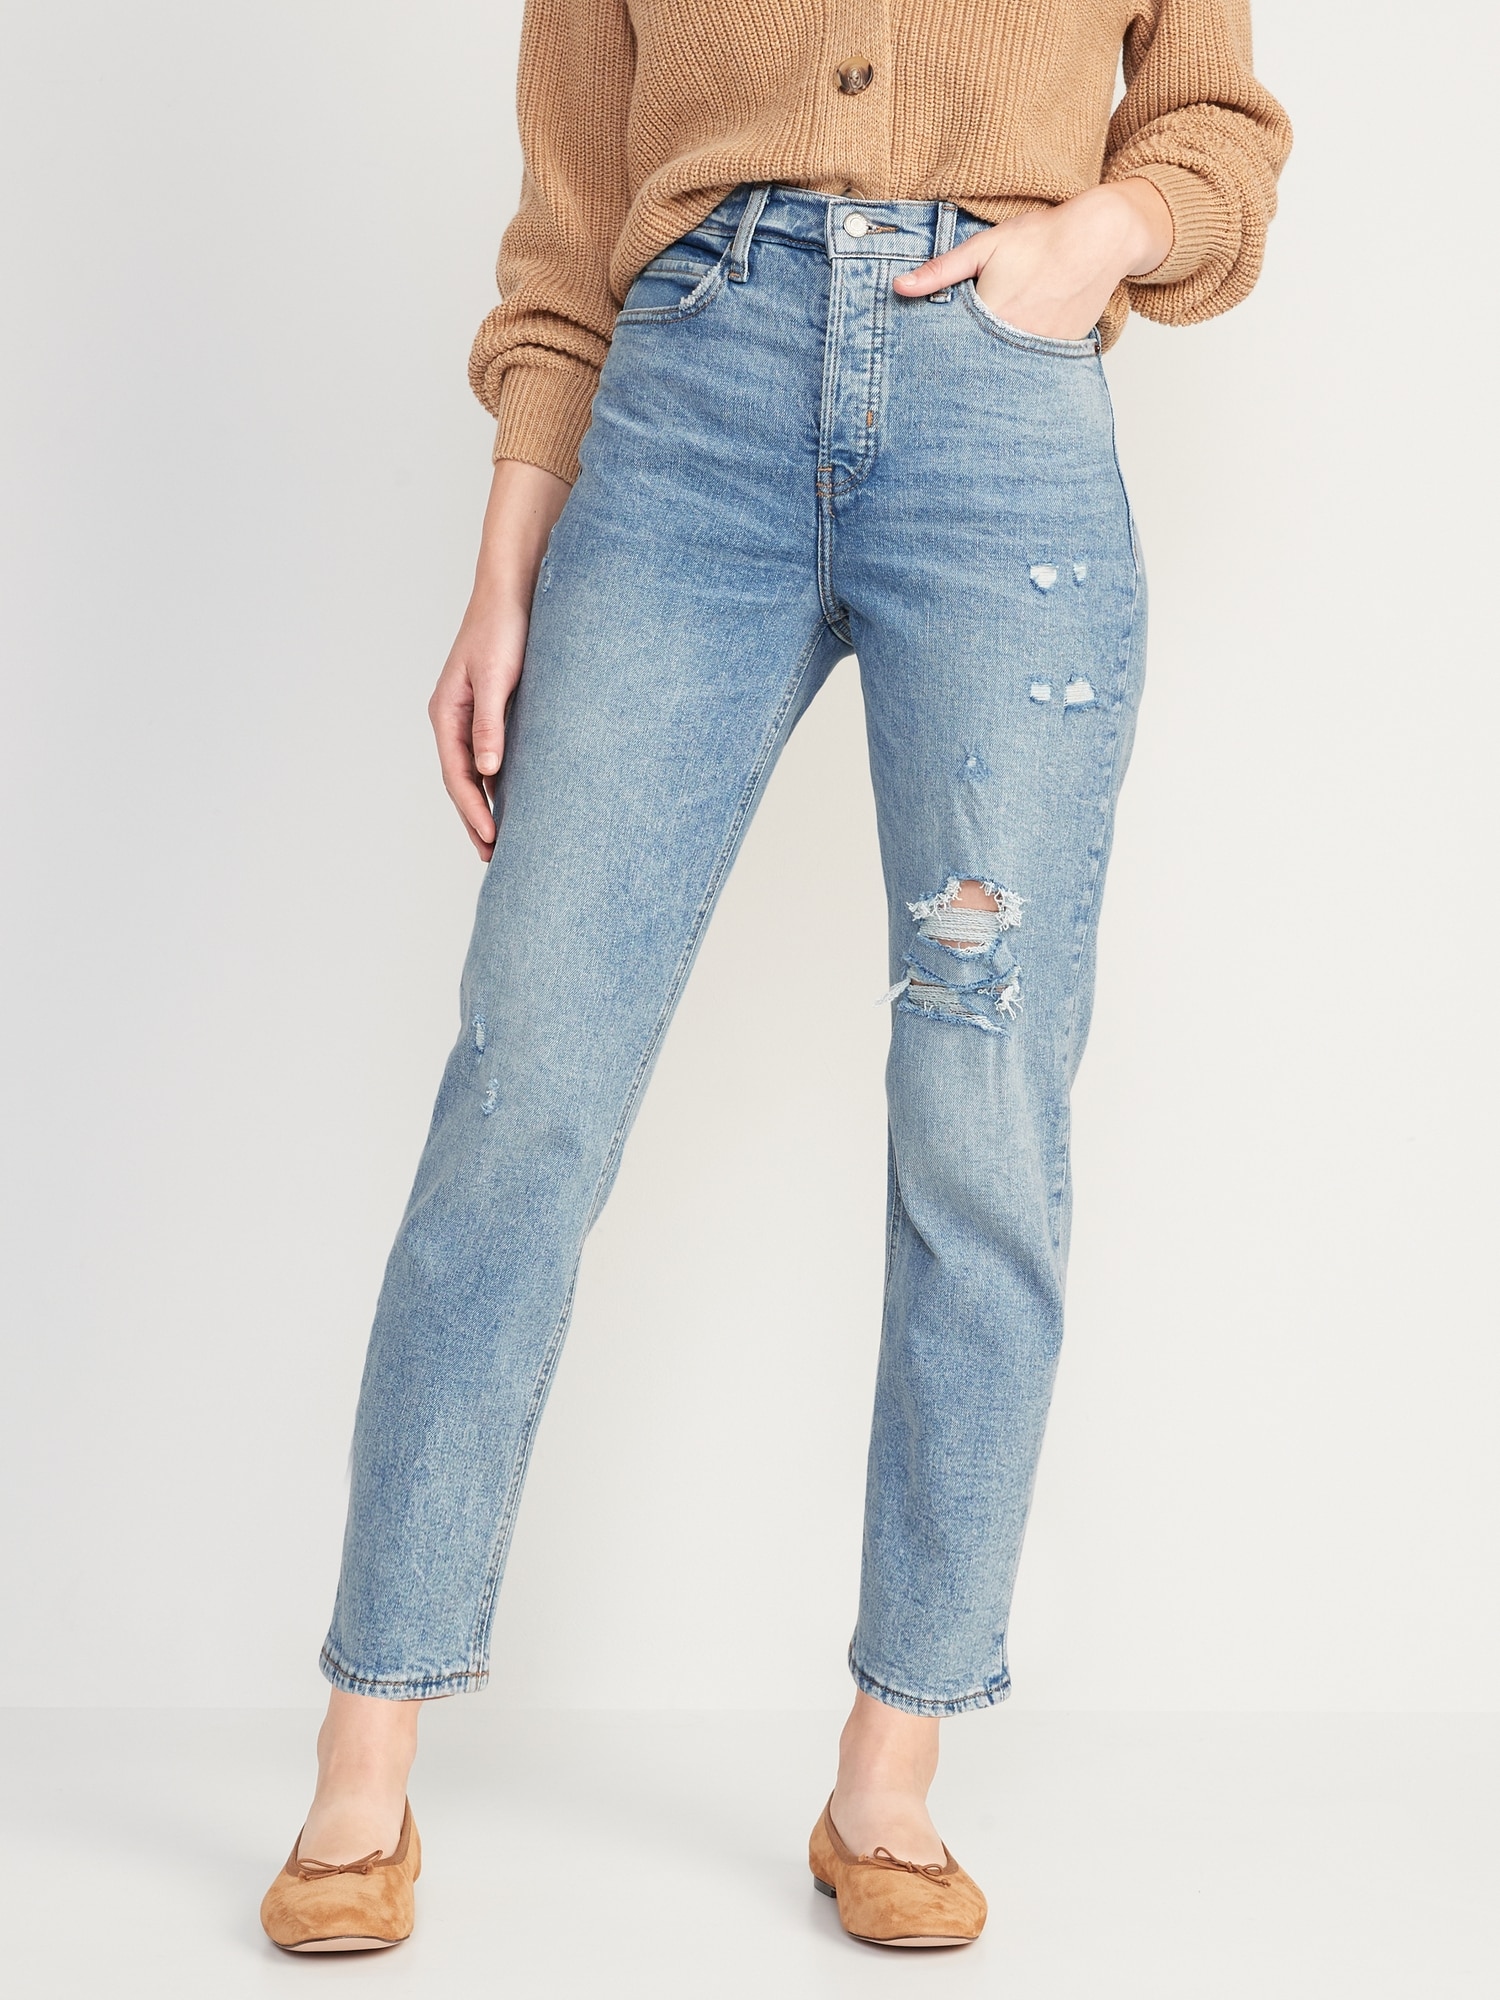 Sky High Straight Jeans | Old Navy